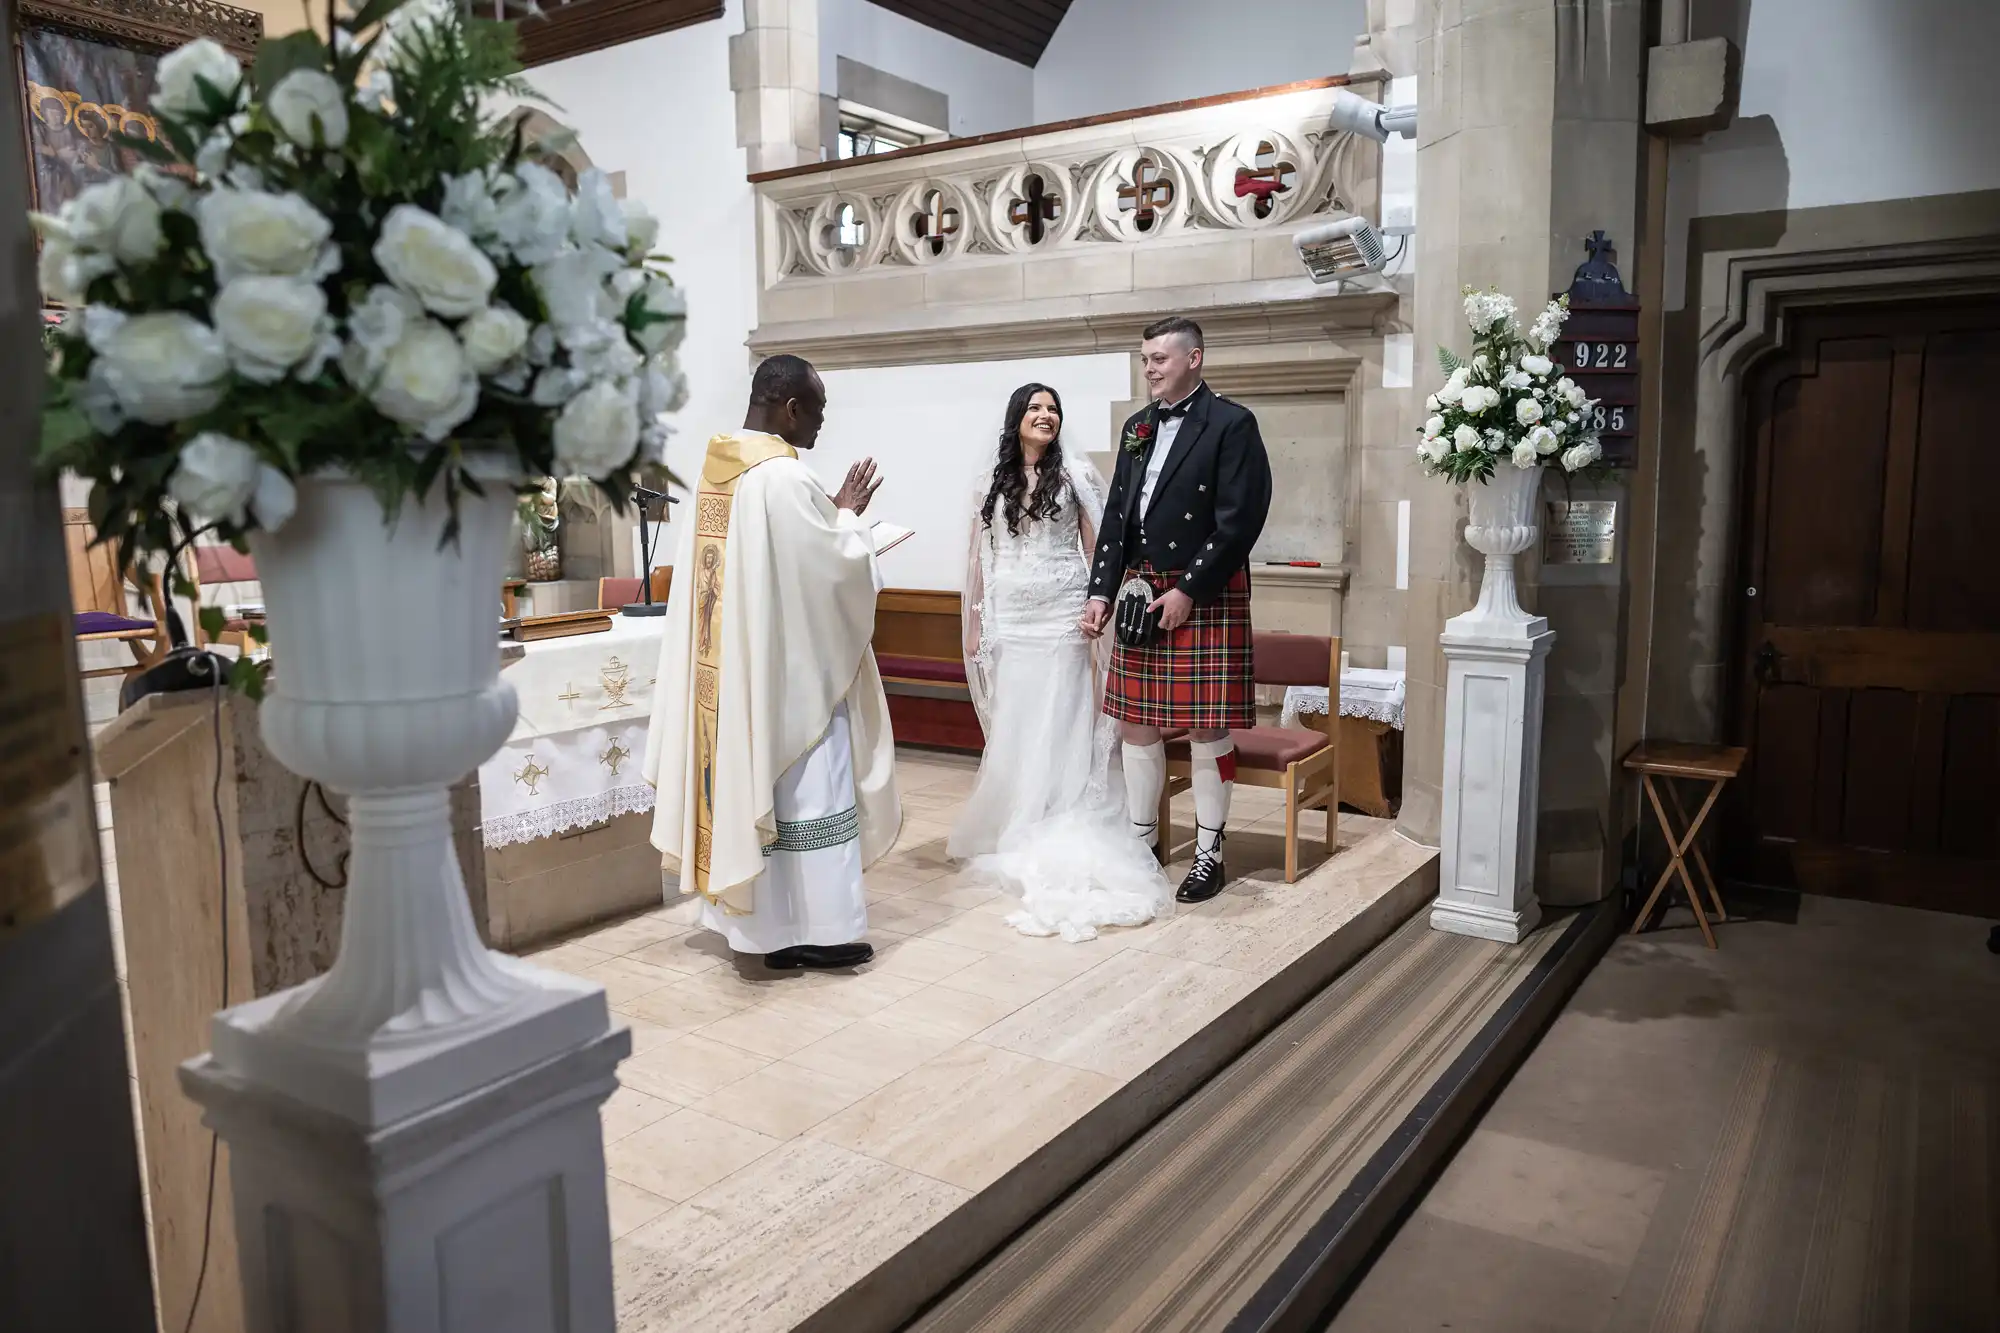 A bride and groom stand before a priest inside a church during a wedding ceremony; the groom wears a kilt, and floral decorations are visible.